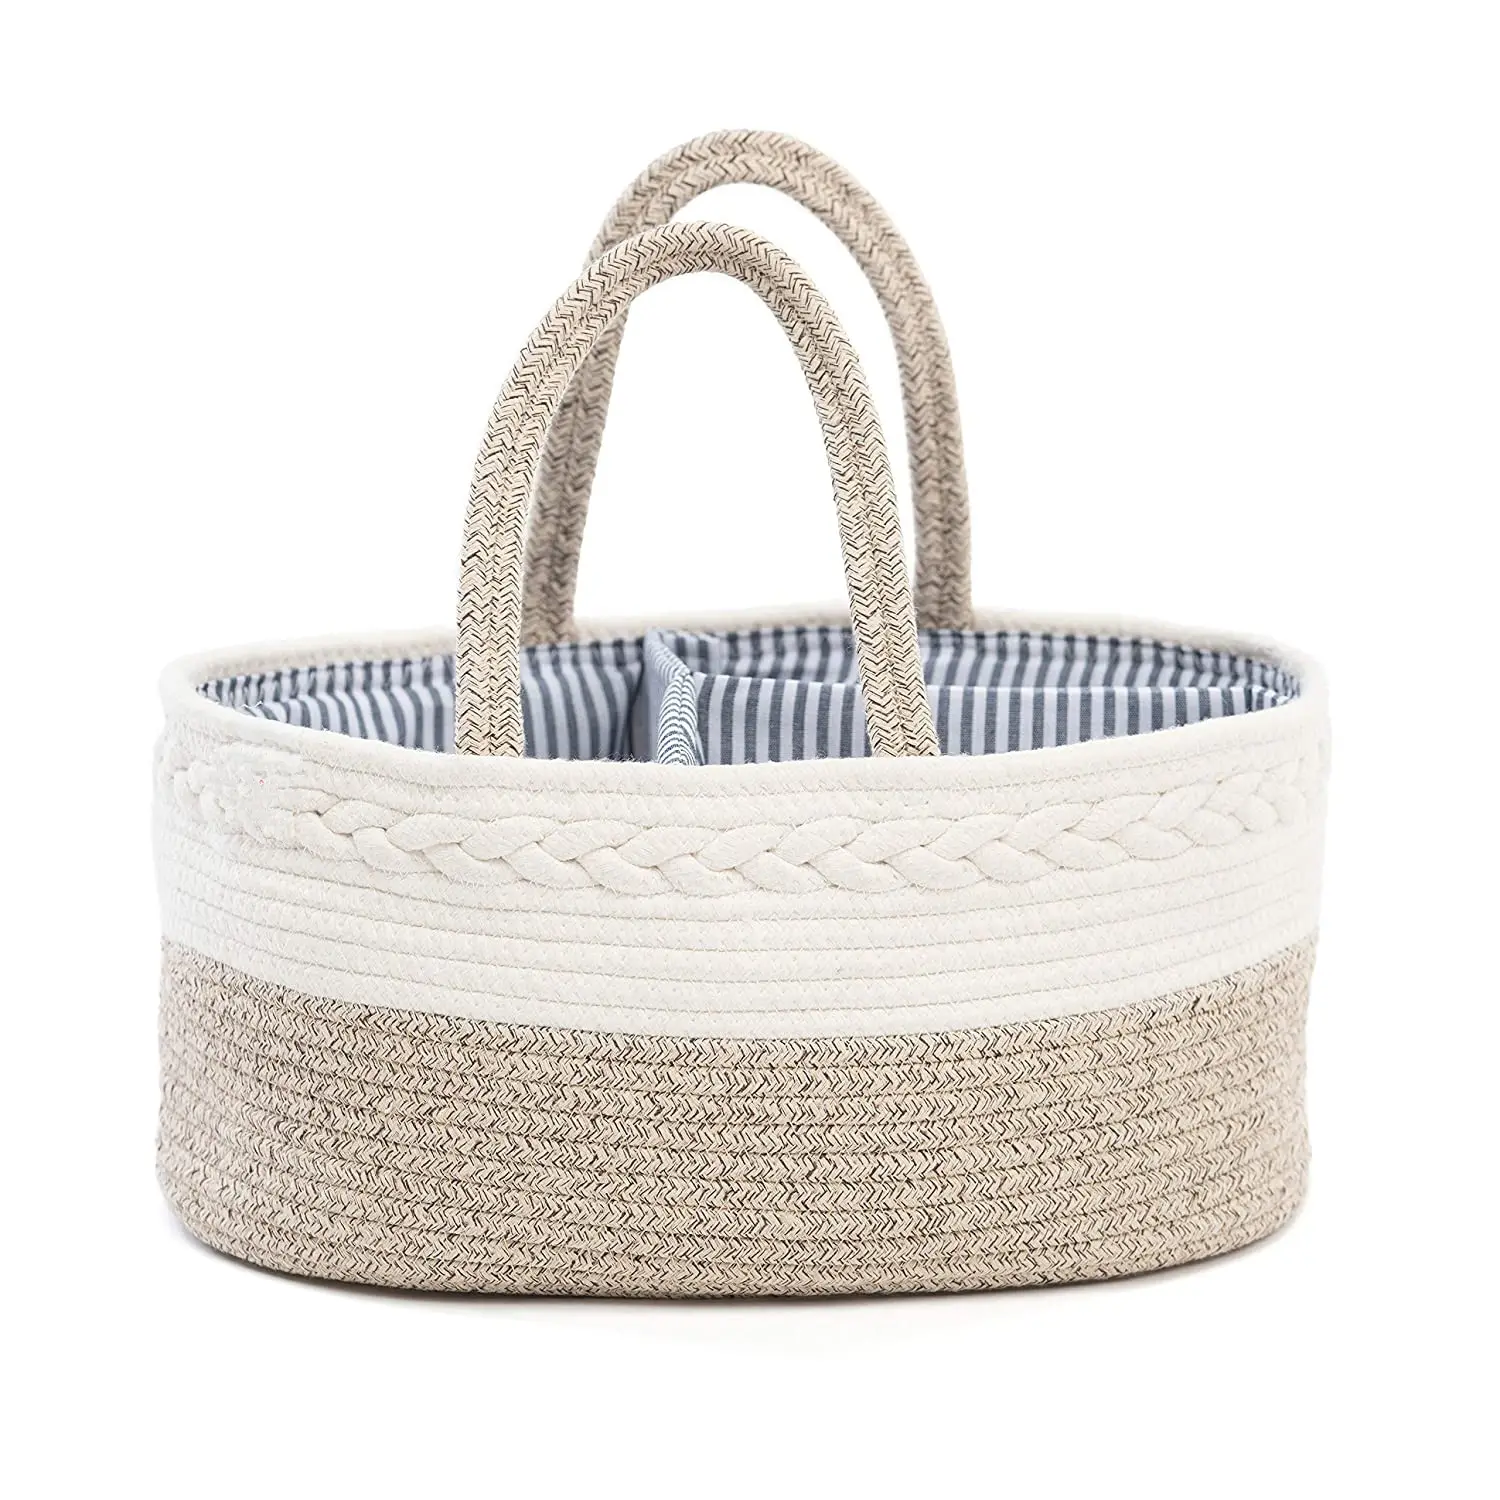 100% Cotton Rope Baby Basket Table Diaper Storage Caddy  Portable Diaper Caddy for Baby Stuff  Best Baby Shower Gifts